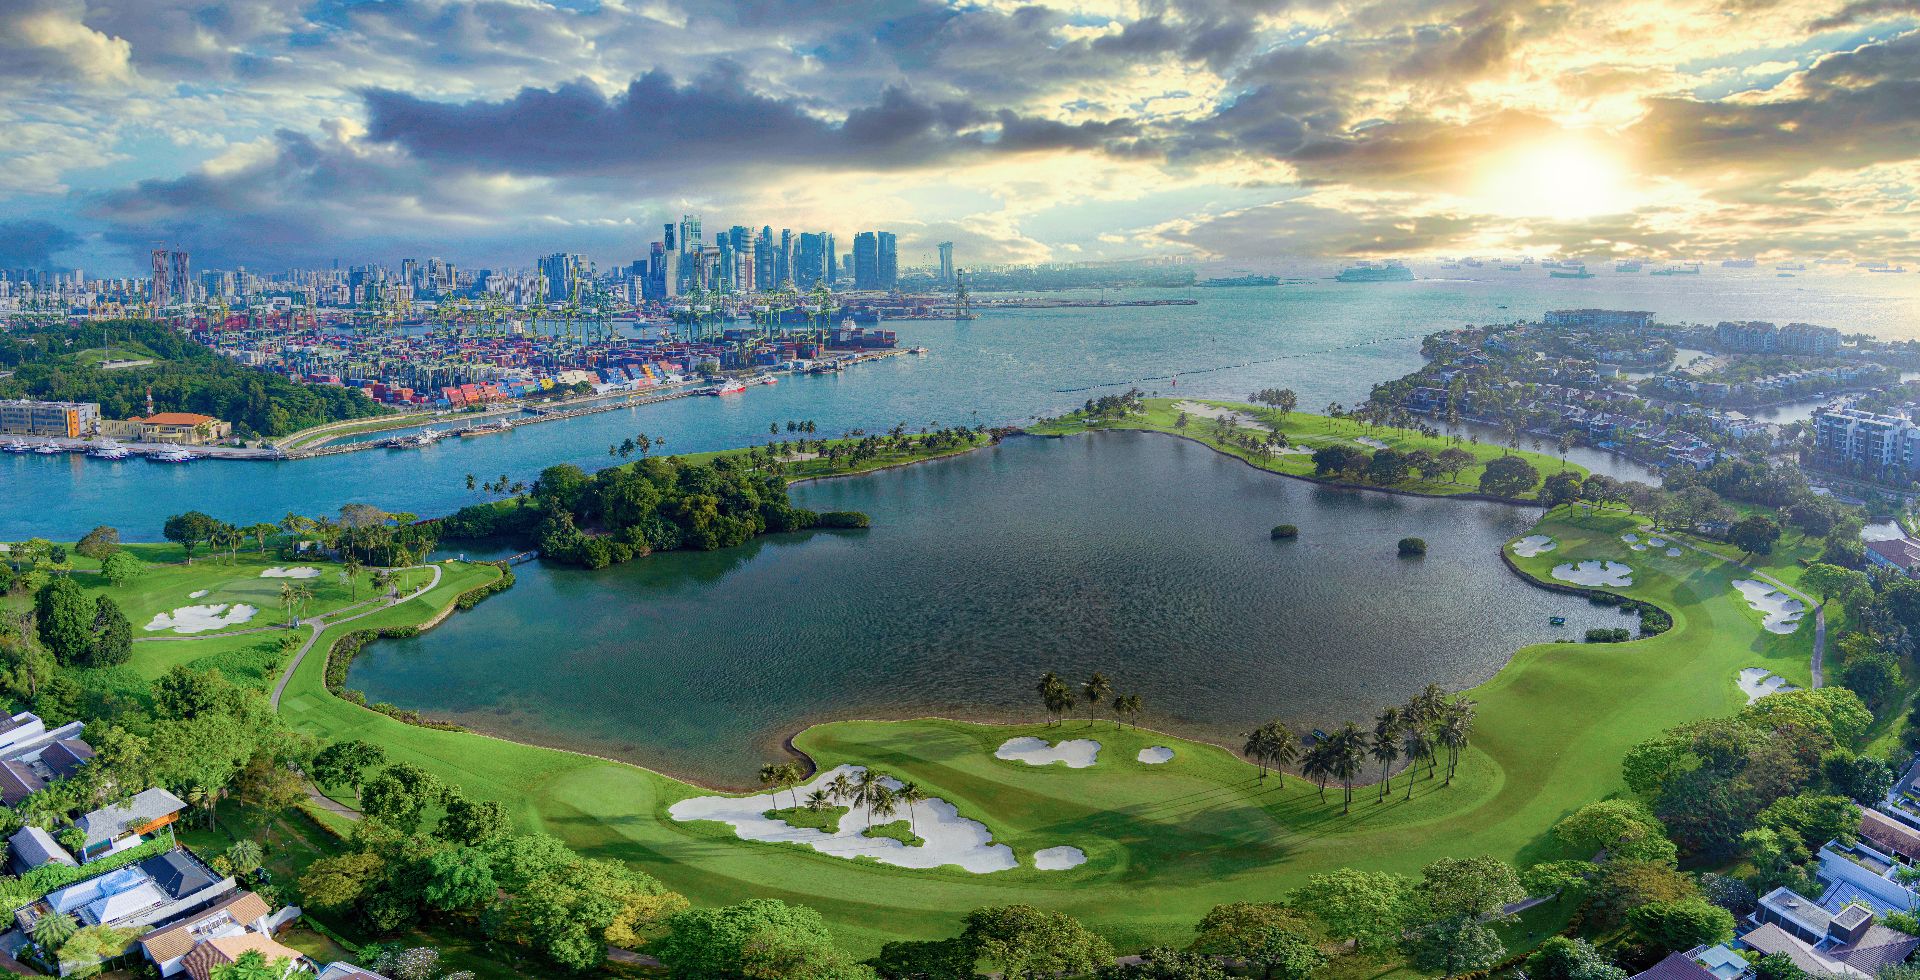 Overhead view of the Sentosa Golf Course